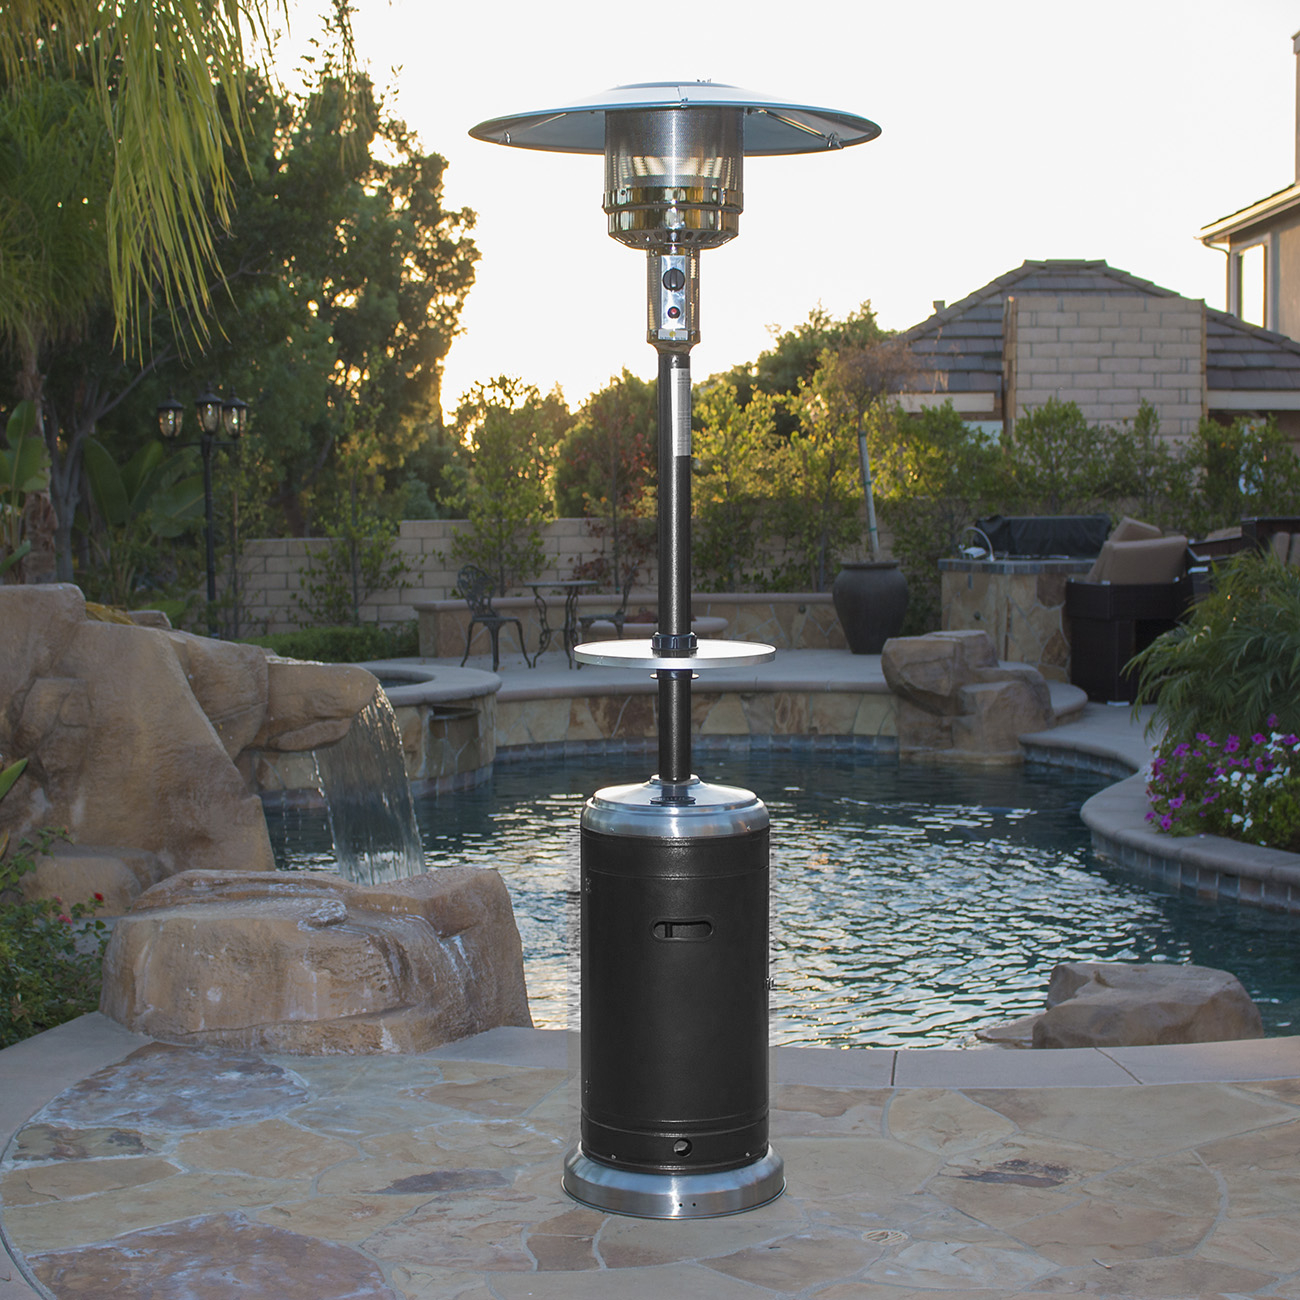 Details About 48000 Btu Black And Stainless Steel Full Size Propane Gas Patio Heater W Table within sizing 1300 X 1300